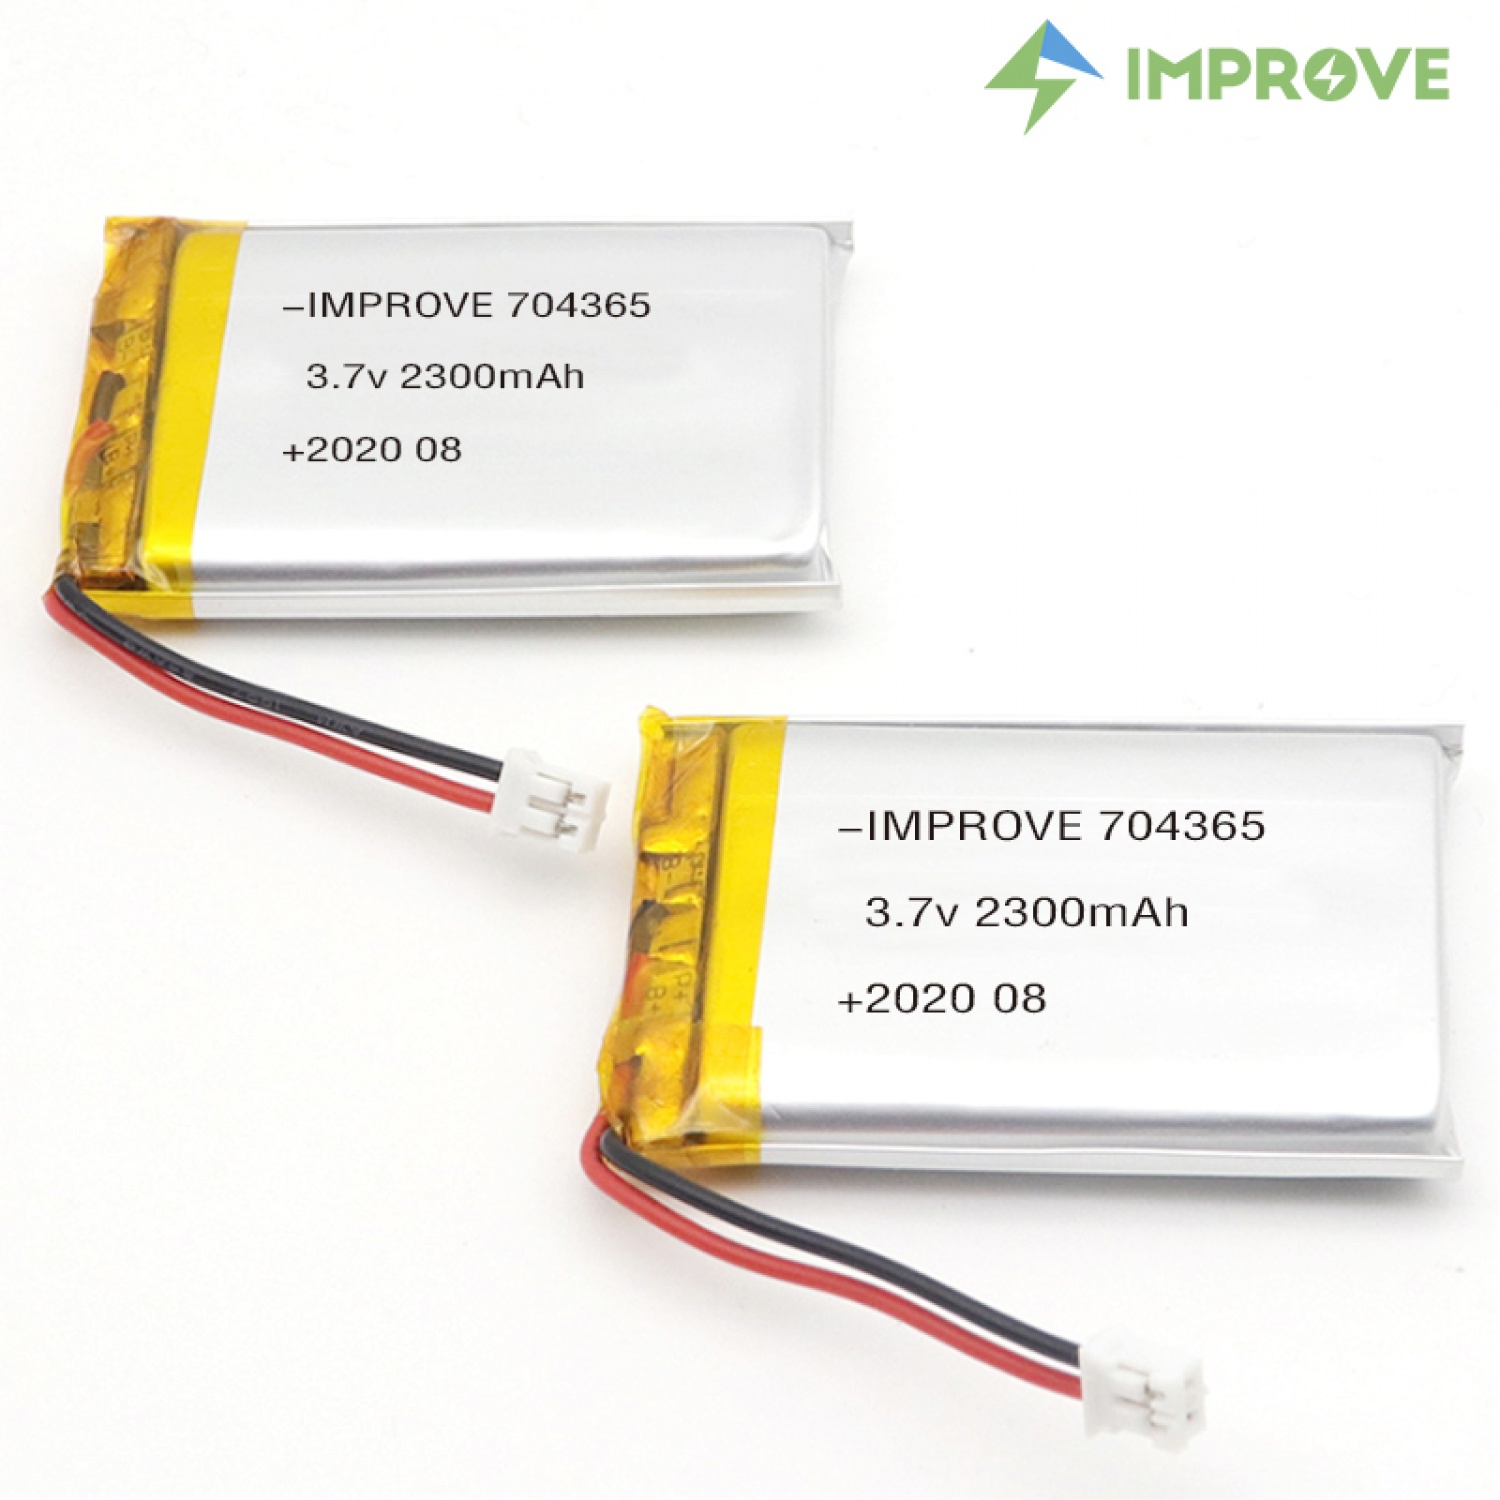 Advantages of Polymer Lithium Battery